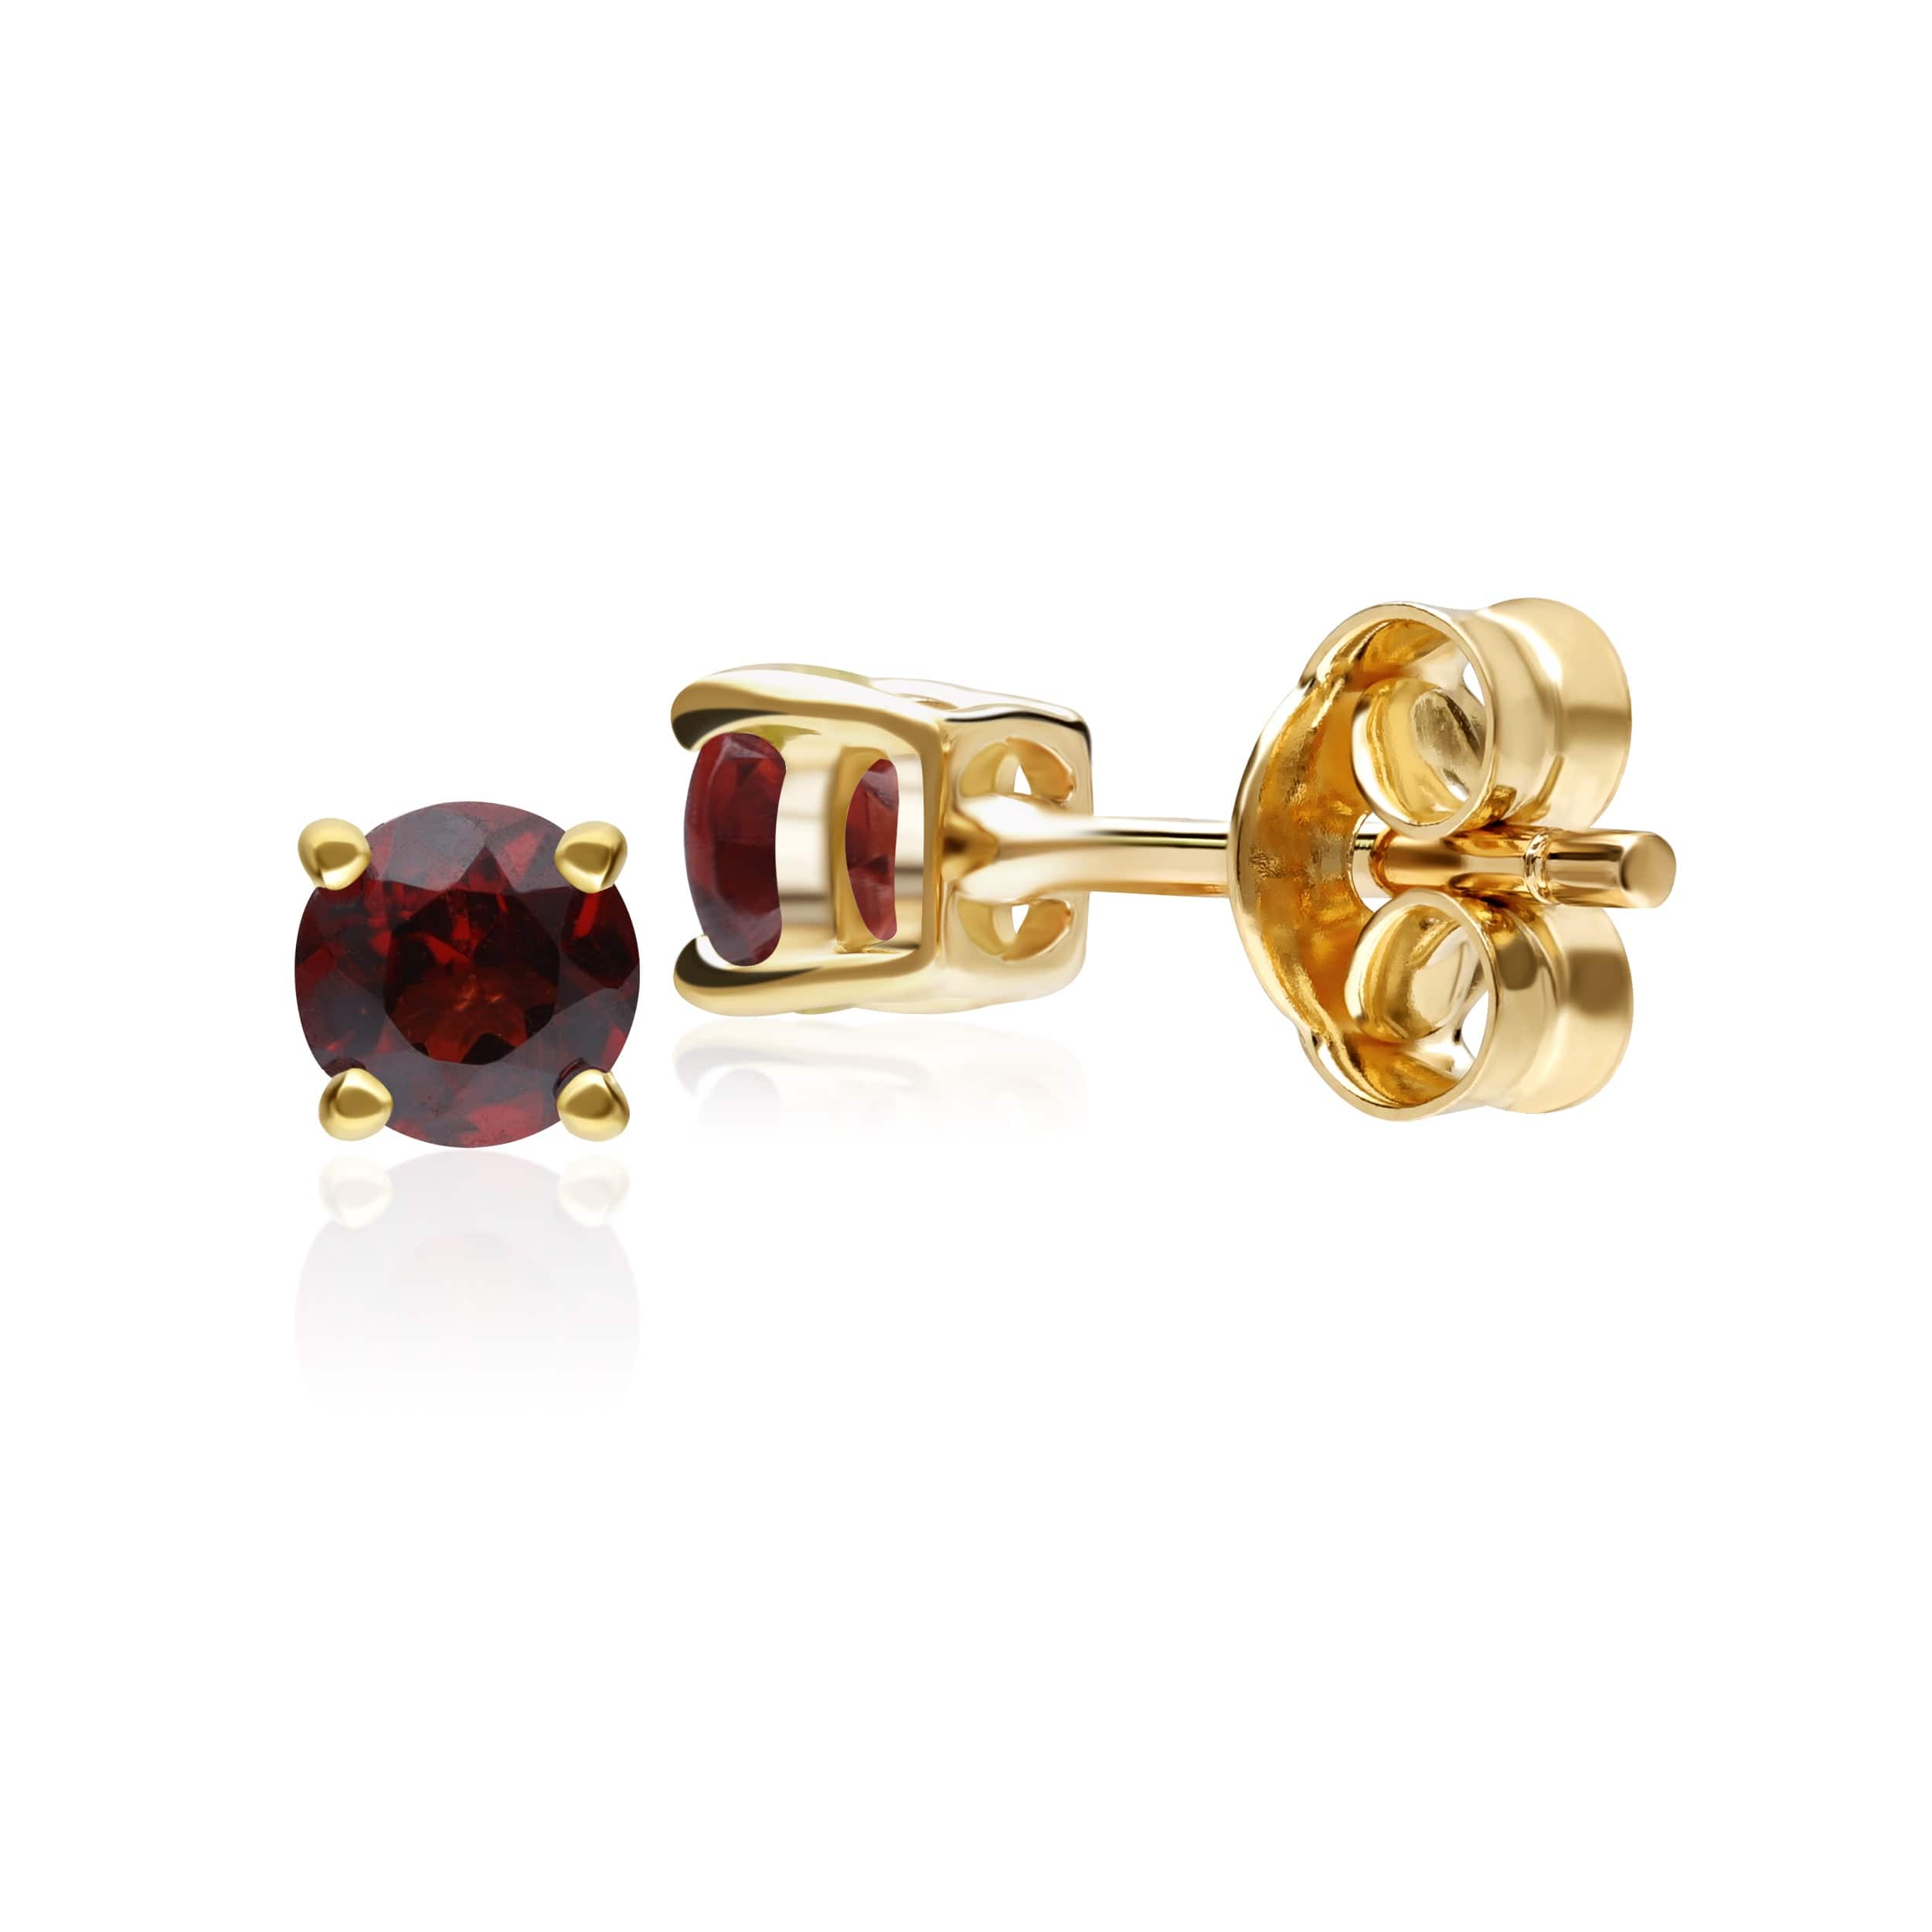 11568 Classic Round Garnet Stud Earrings in 9ct Yellow Gold 3.5mm 2